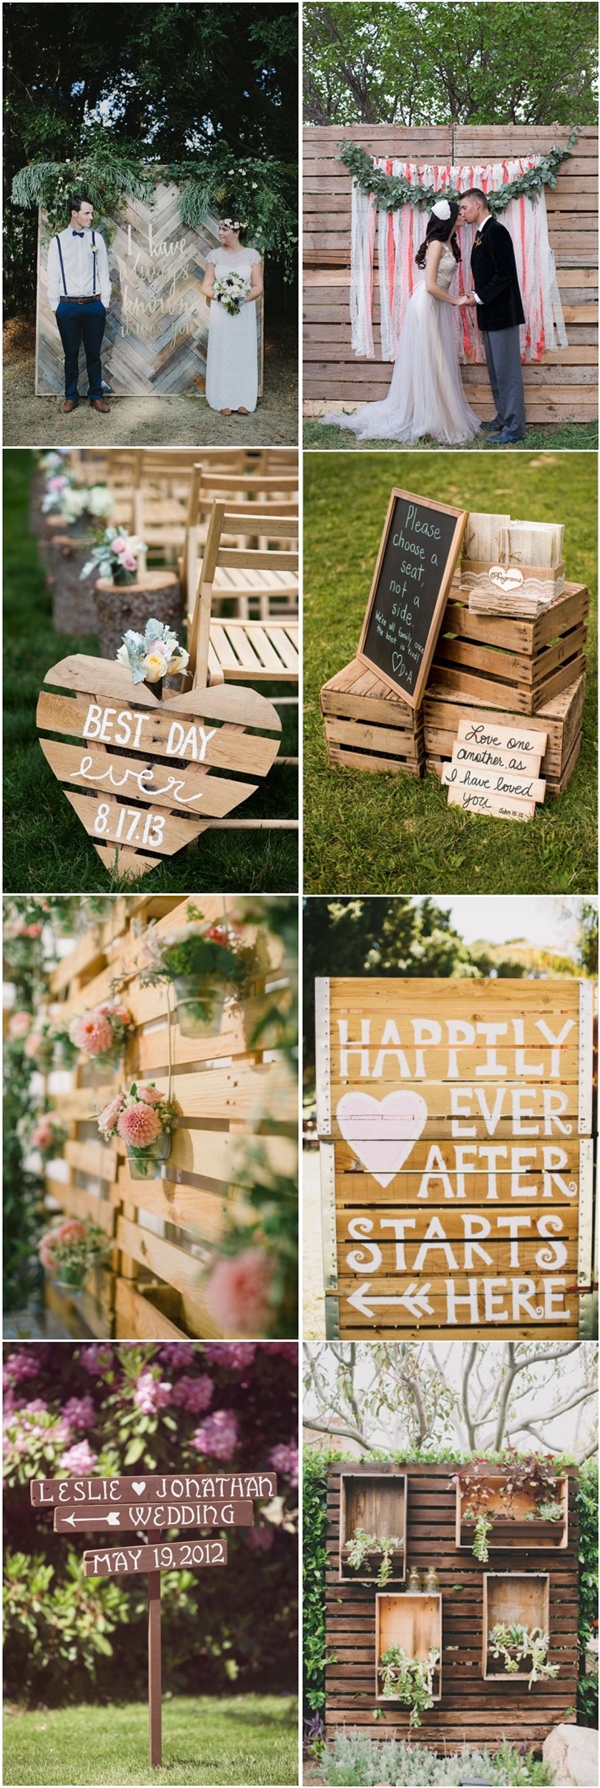 rustic country wood pallets wedding decor ideas